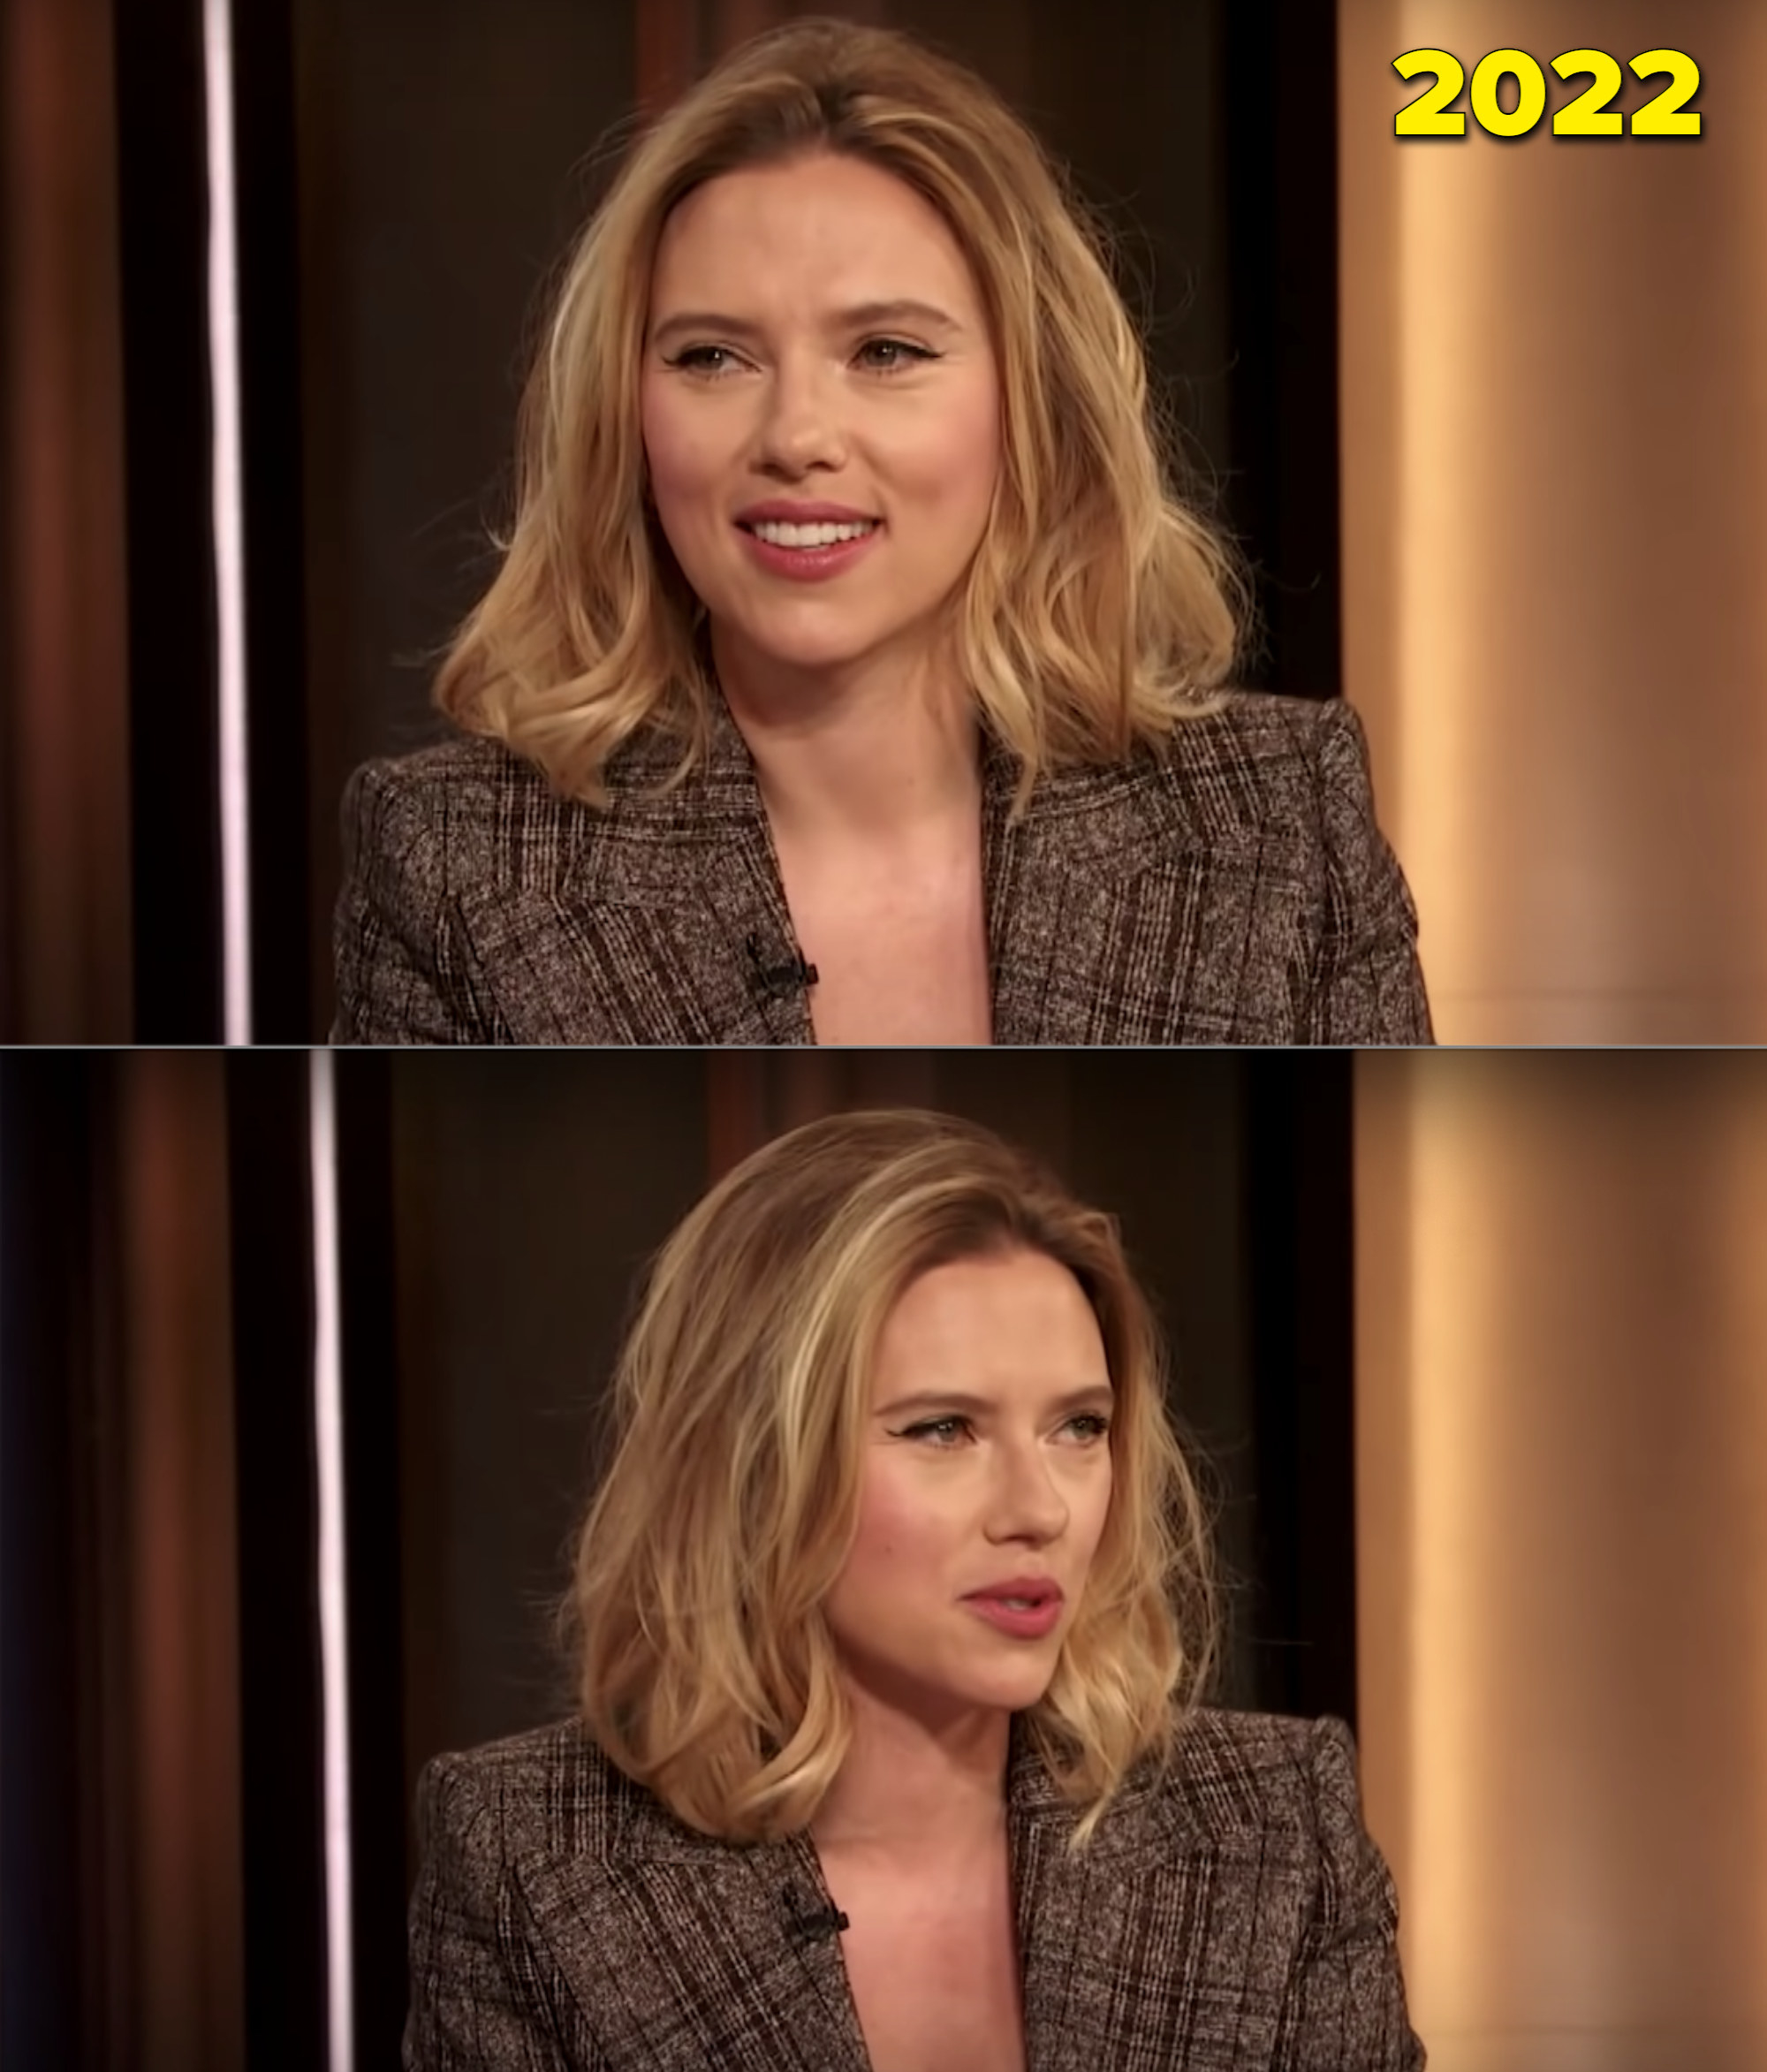 Scarlett Johansson in a recent interview on &quot;The Drew Barrymore Show&quot;